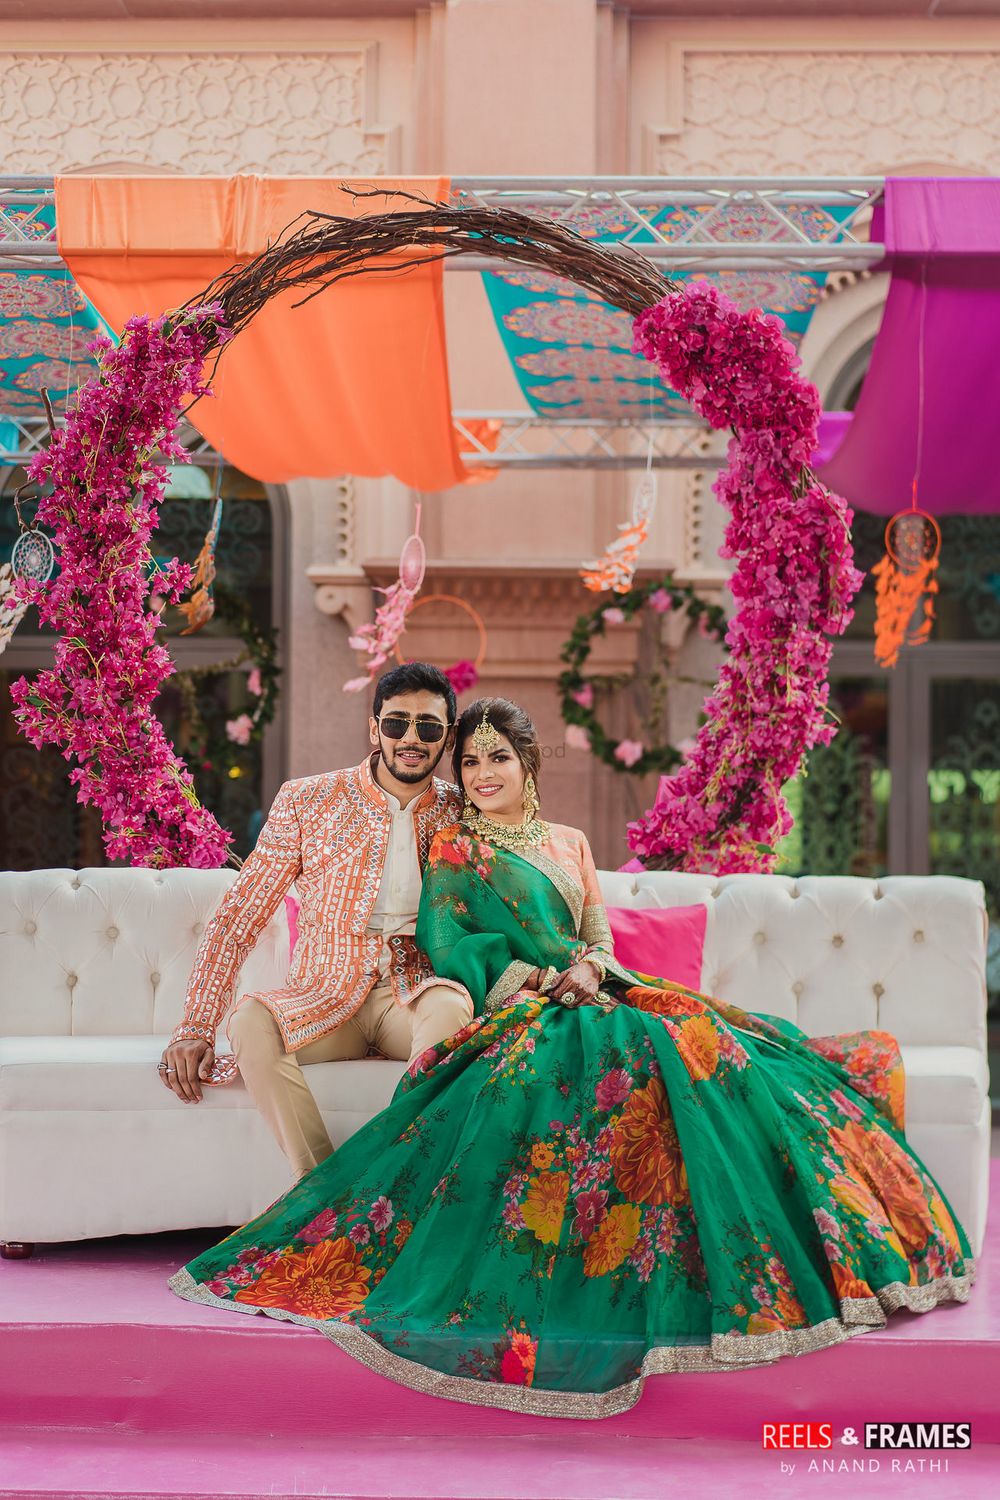 Photo of A bride and groom in colorful and coordinated outfits for their mehndi